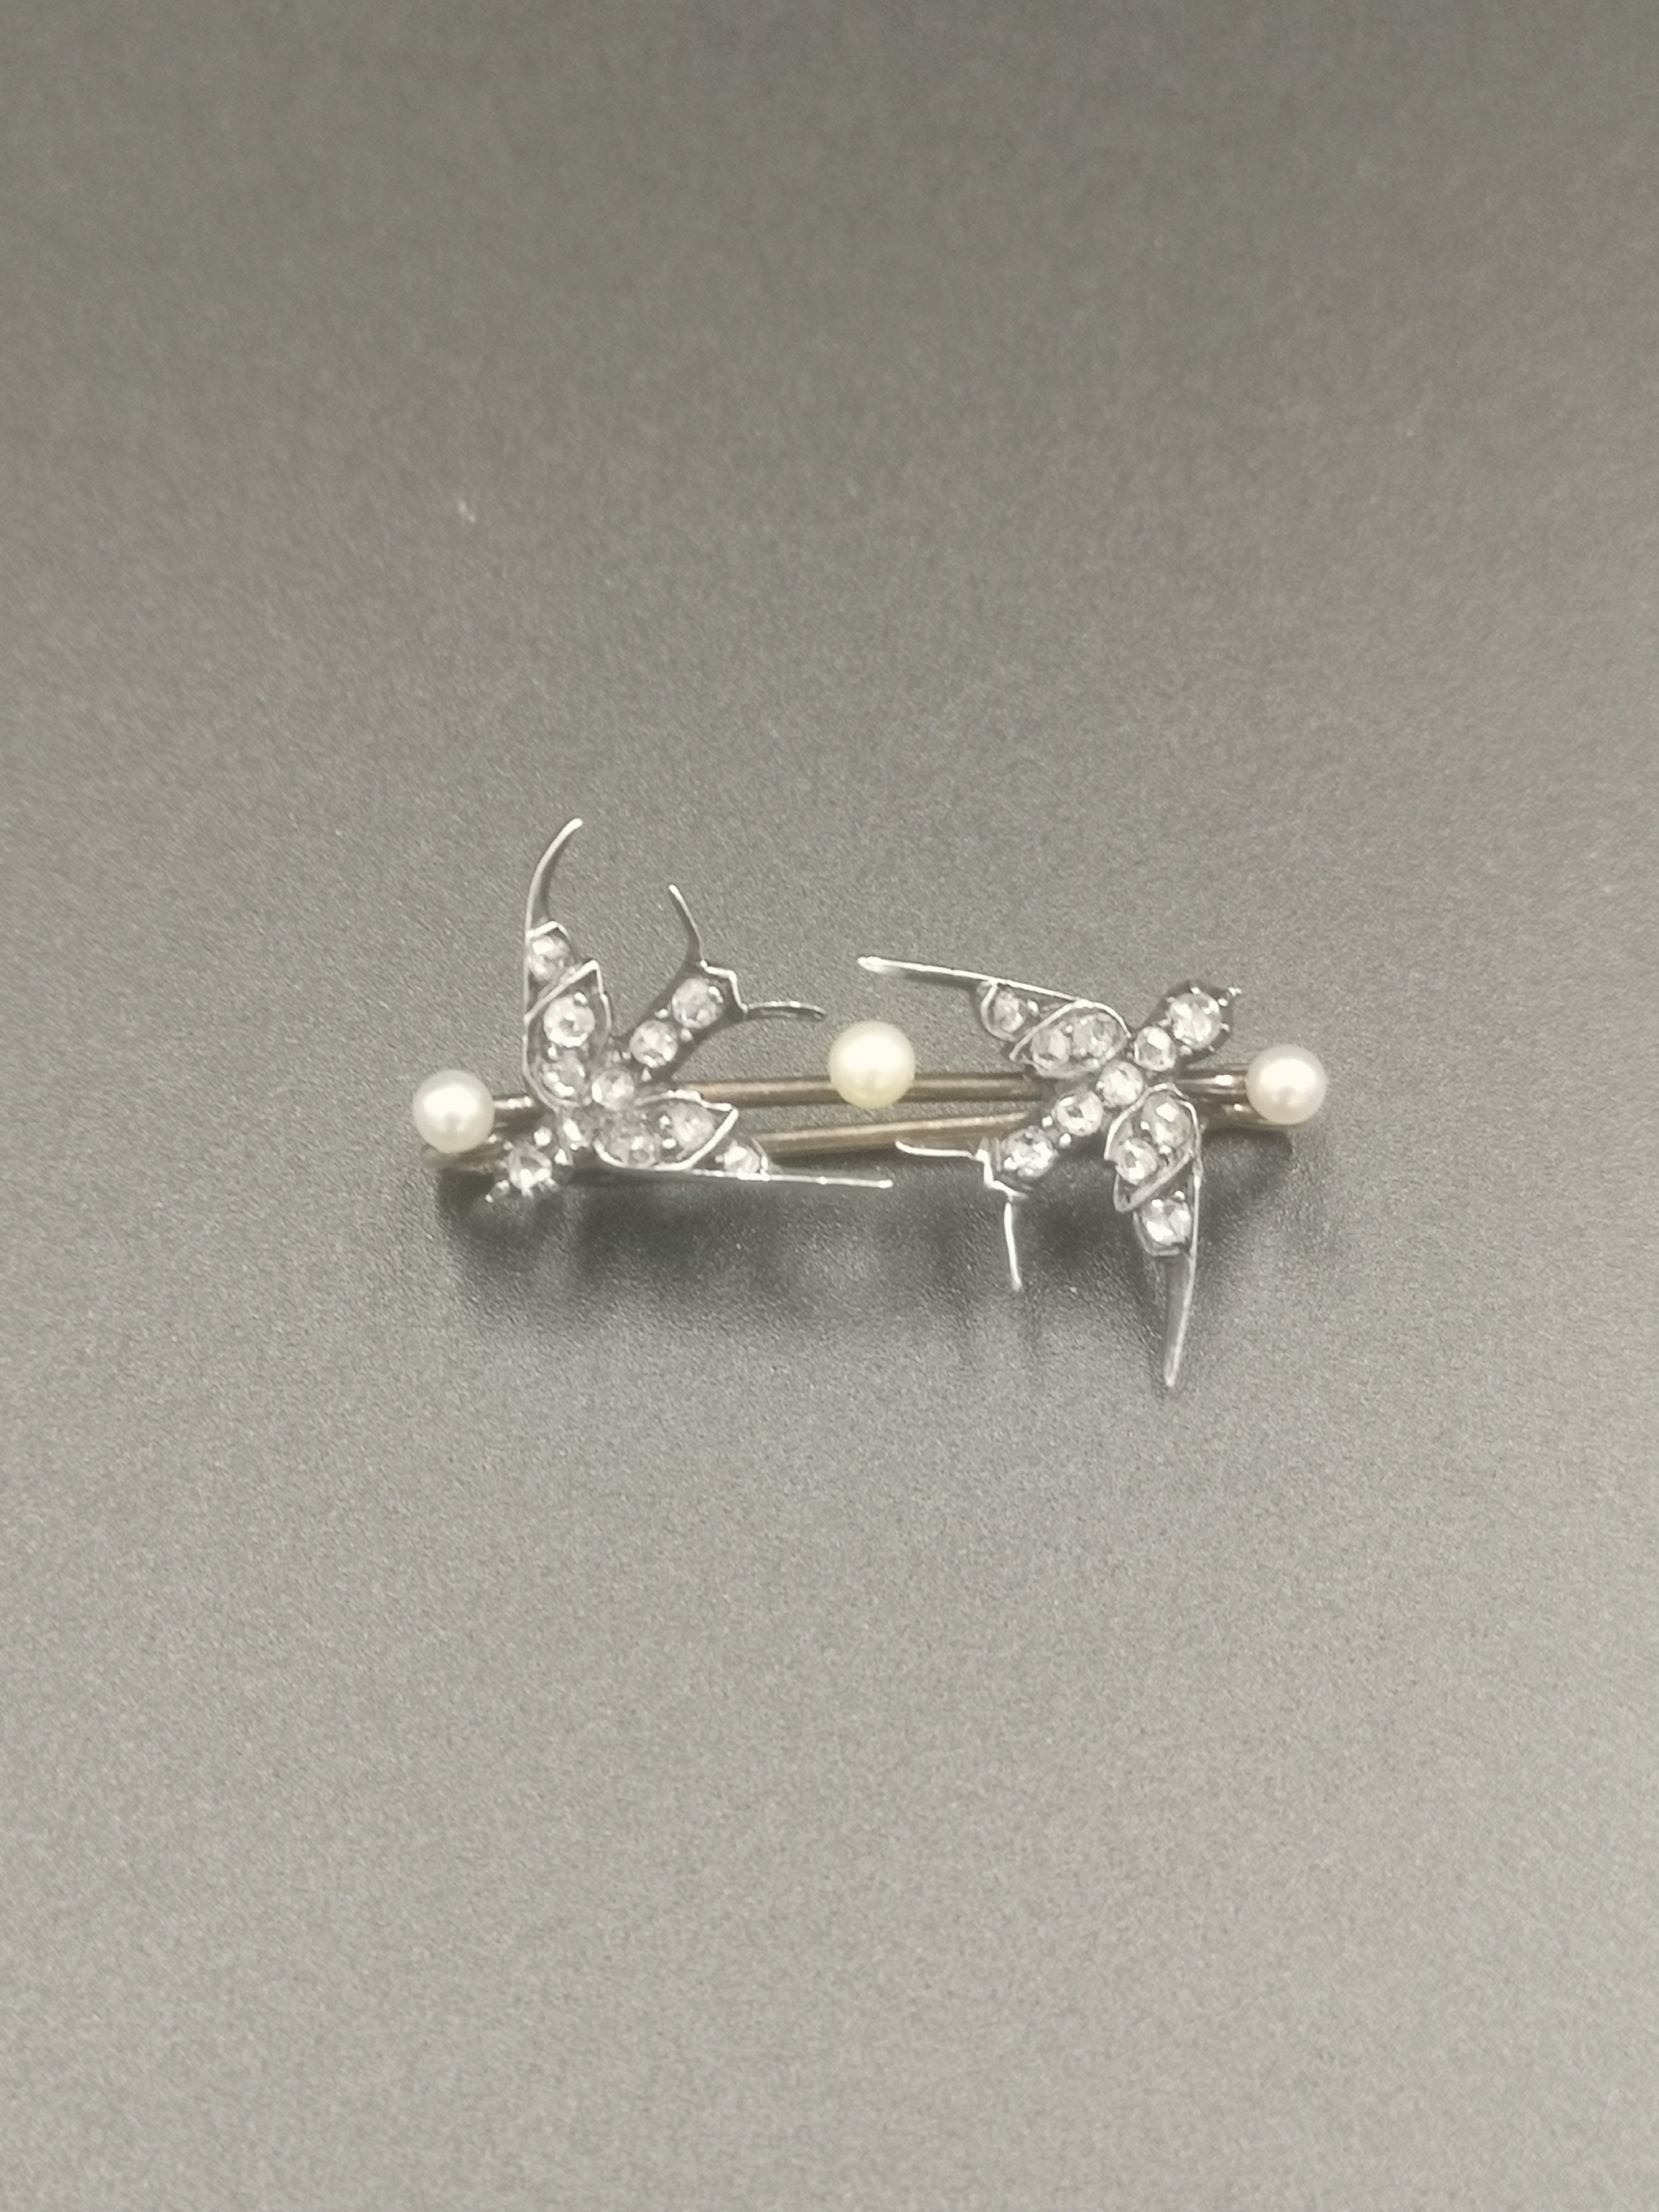 White metal brooch set with diamonds - Image 2 of 4